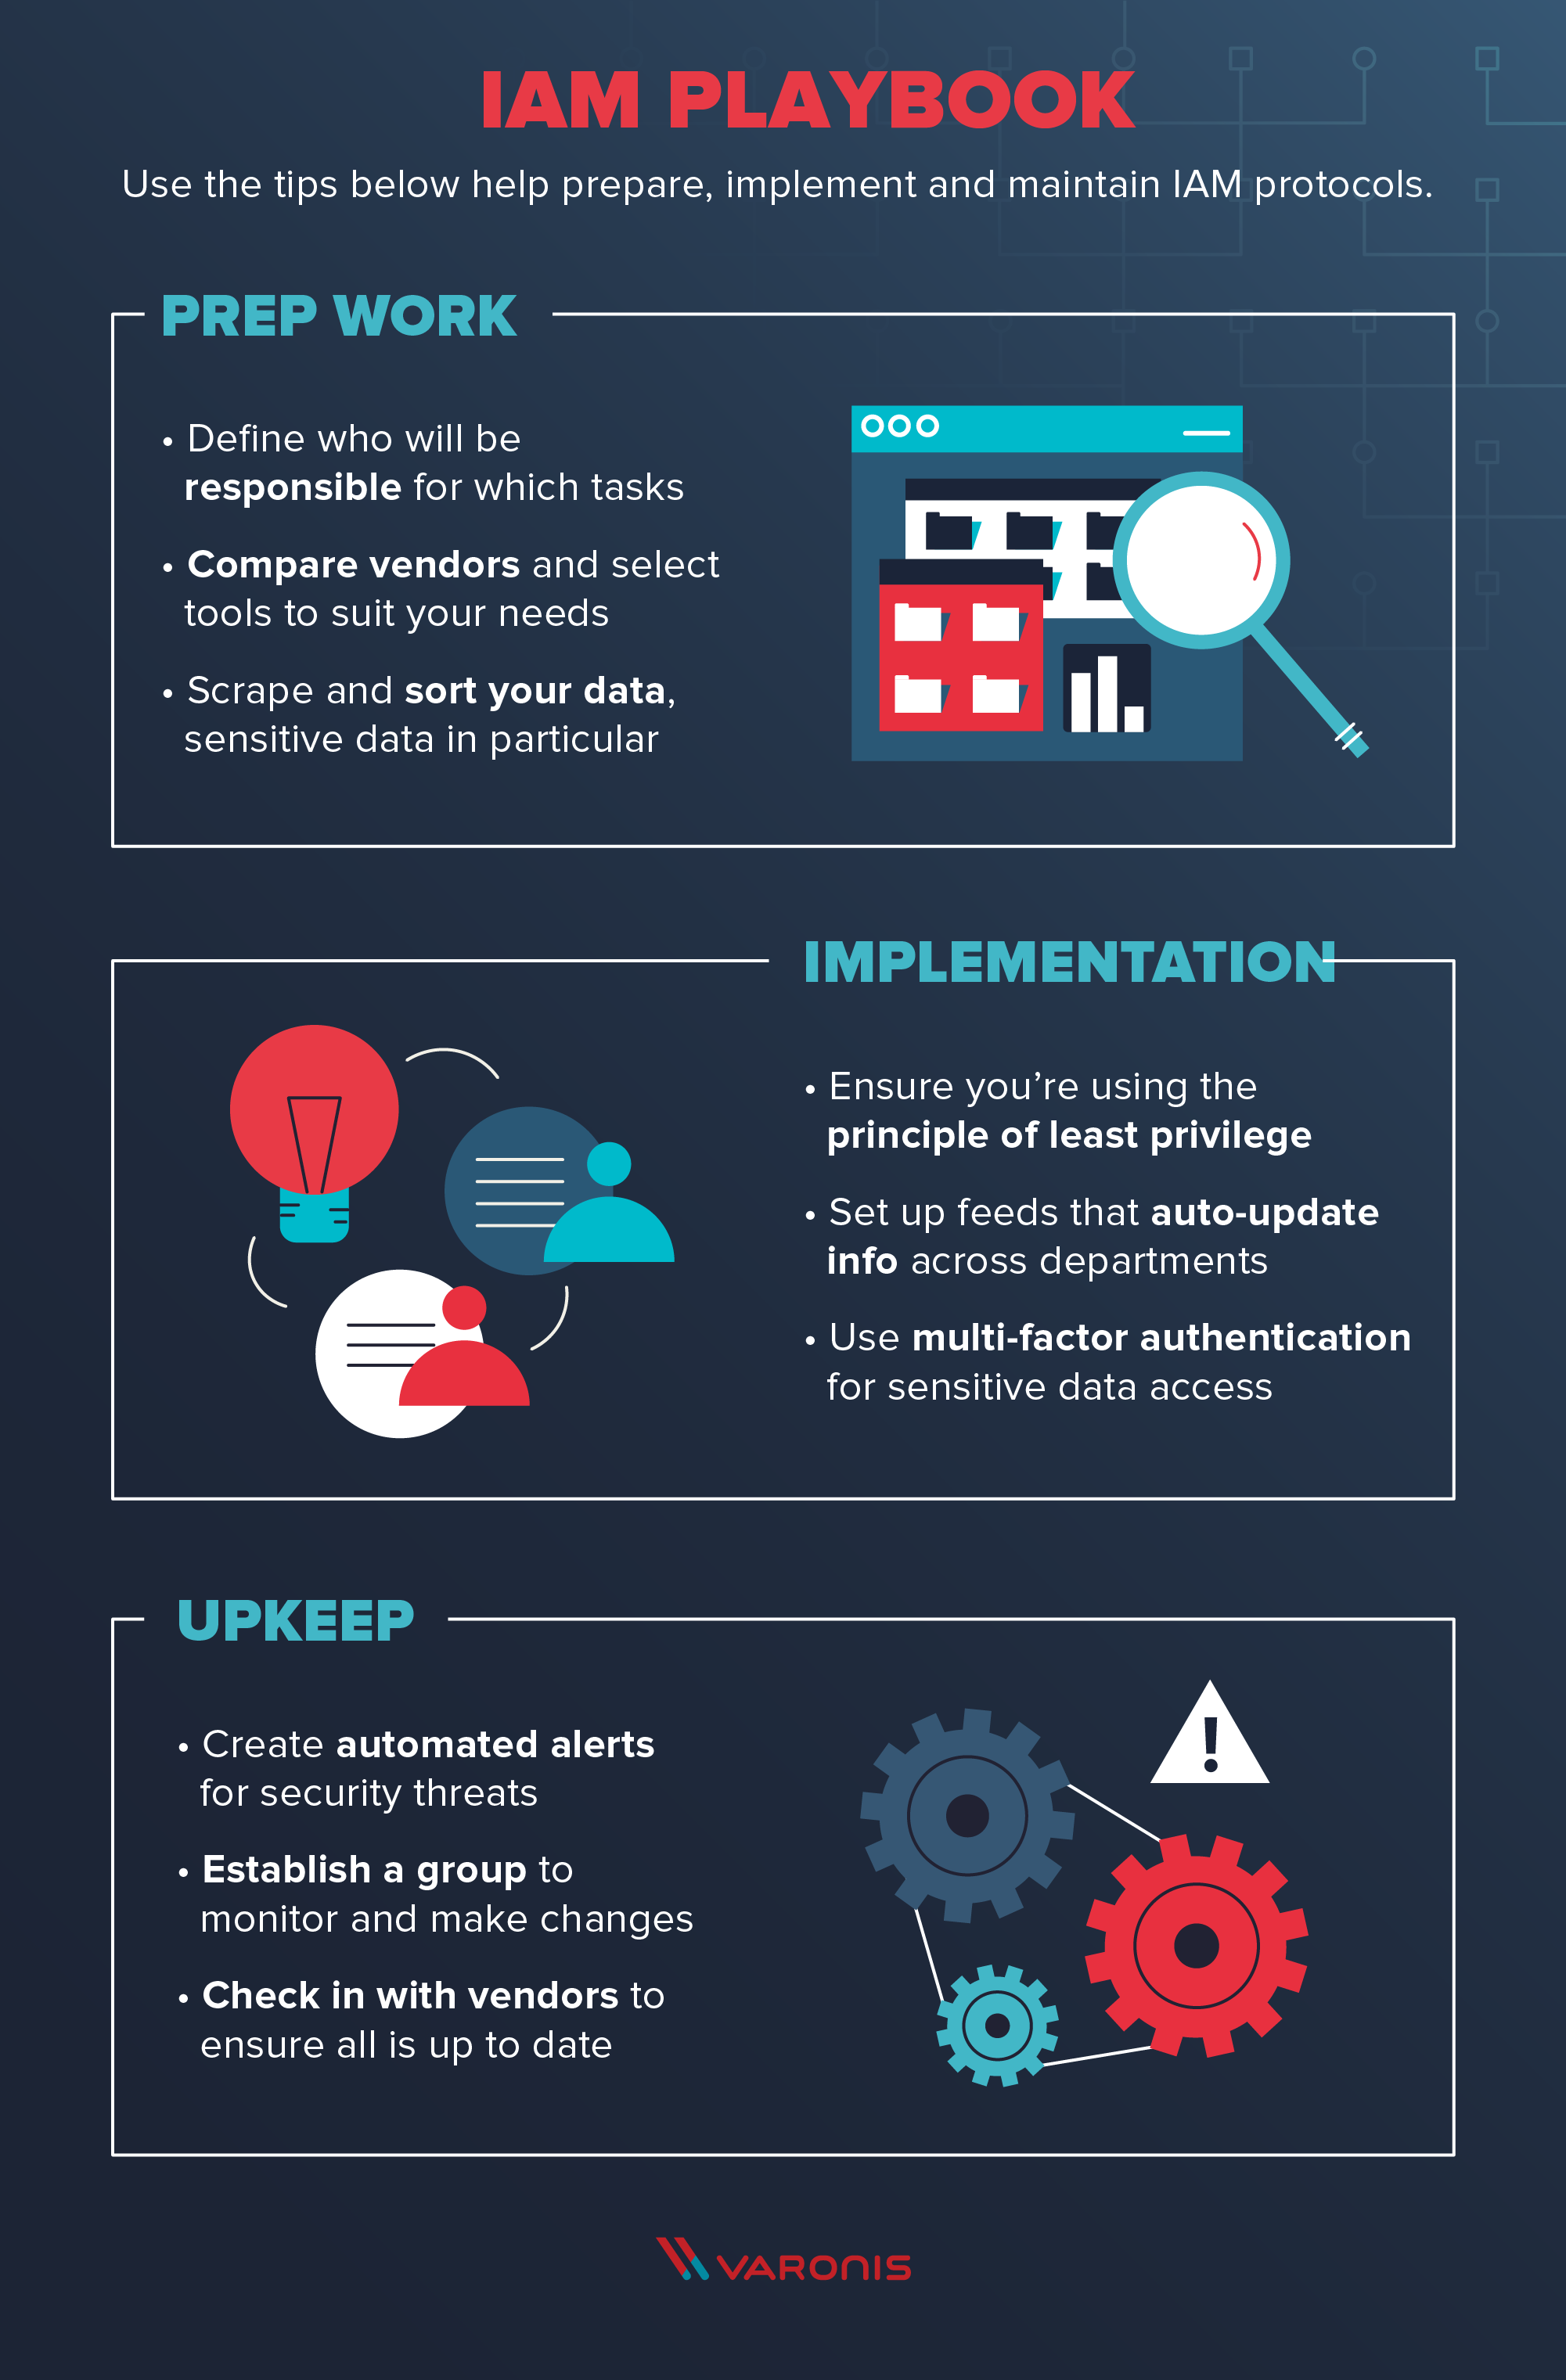 identity access management (IAM) illustration of IAM tips to prepare, implement and maintain IAM standards